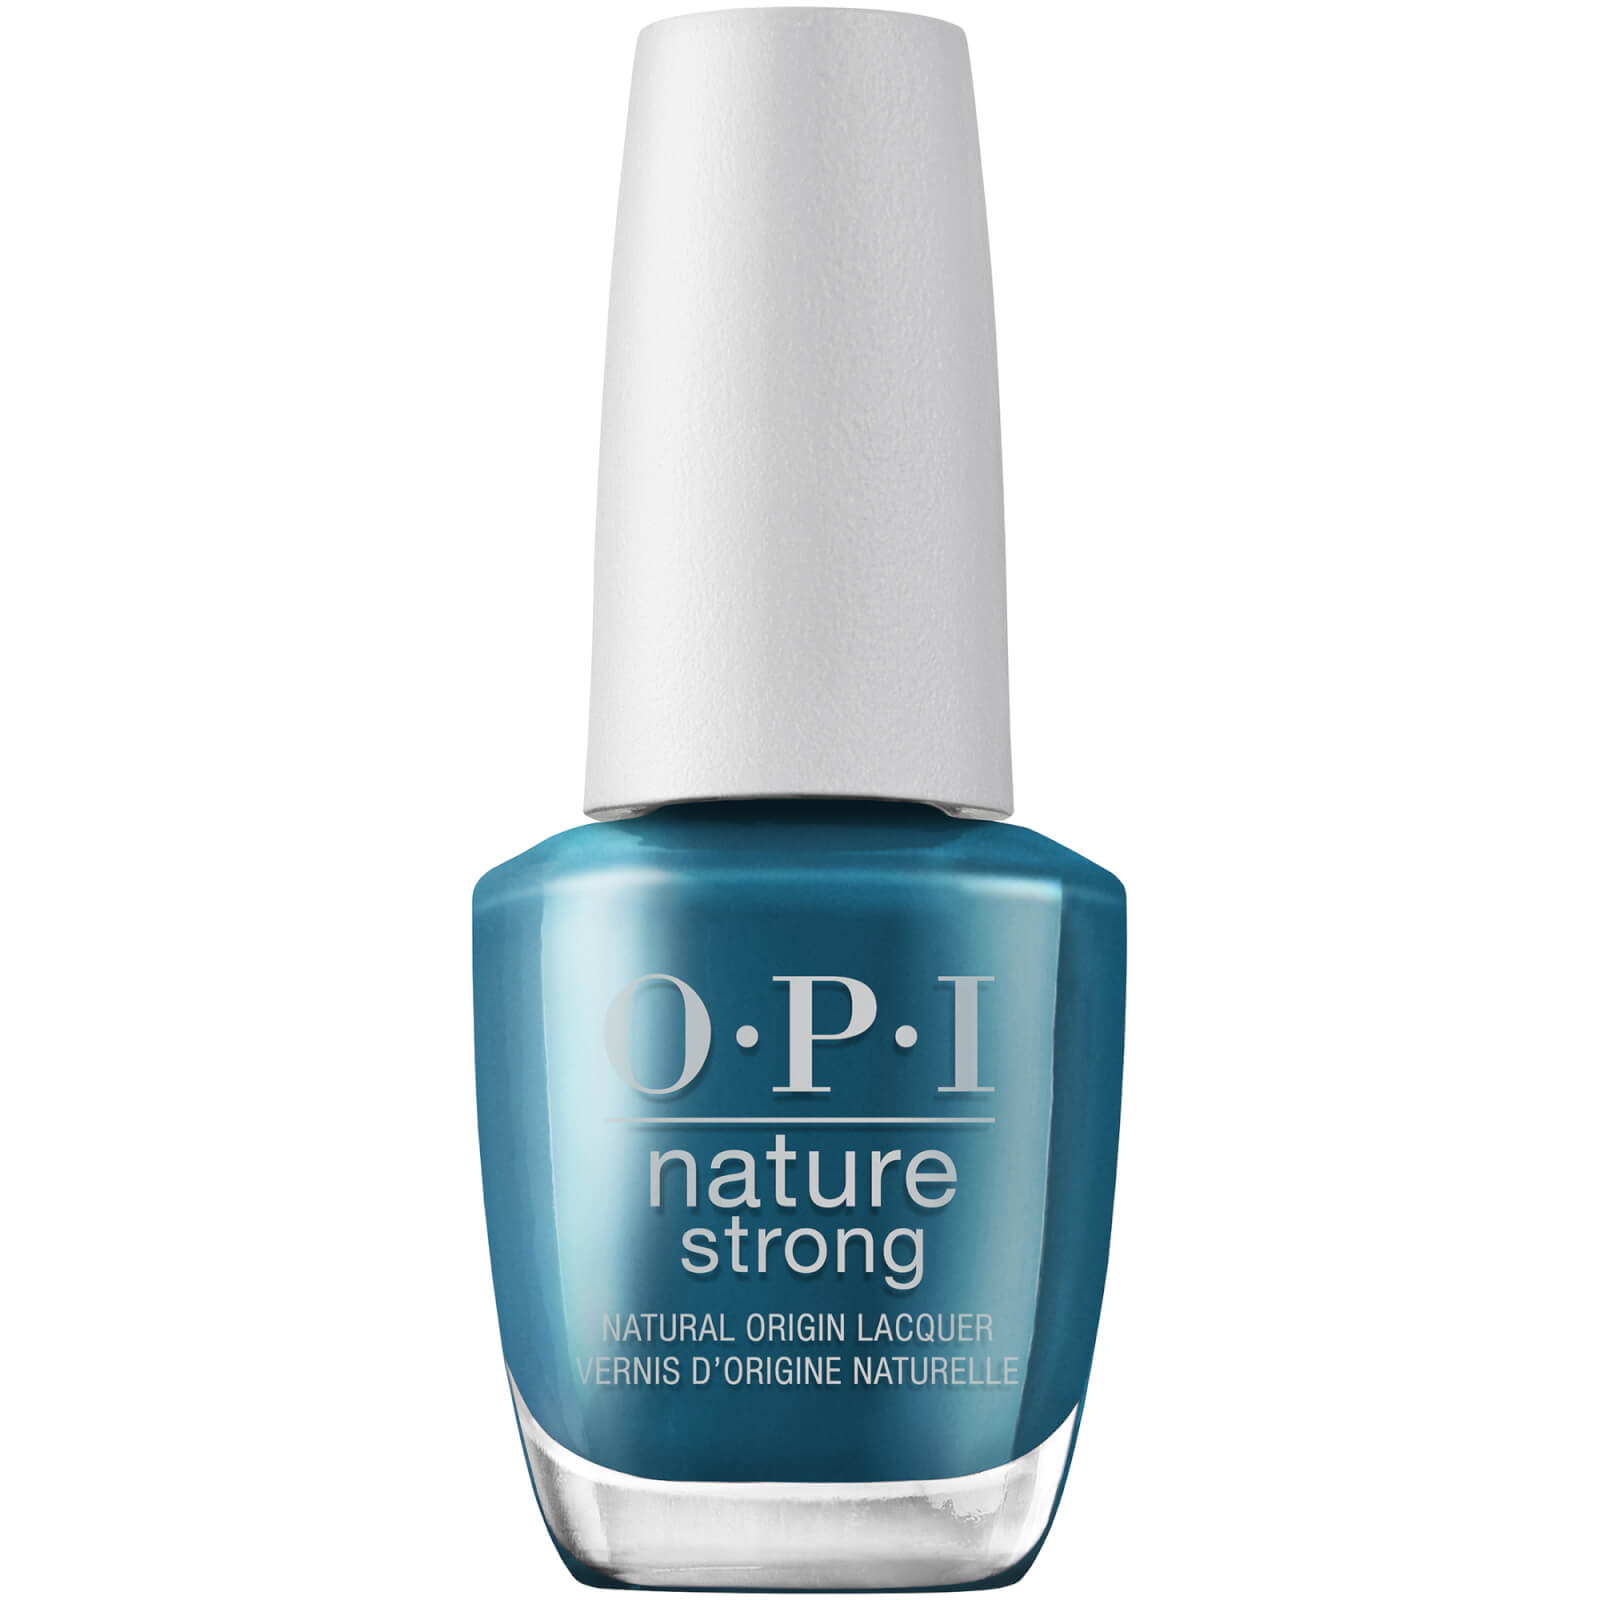 Image of Smalto Unghie Nature Strong Natural Vegan OPI 15ml (varie tonalità) - All Heal Queen Mother Earth